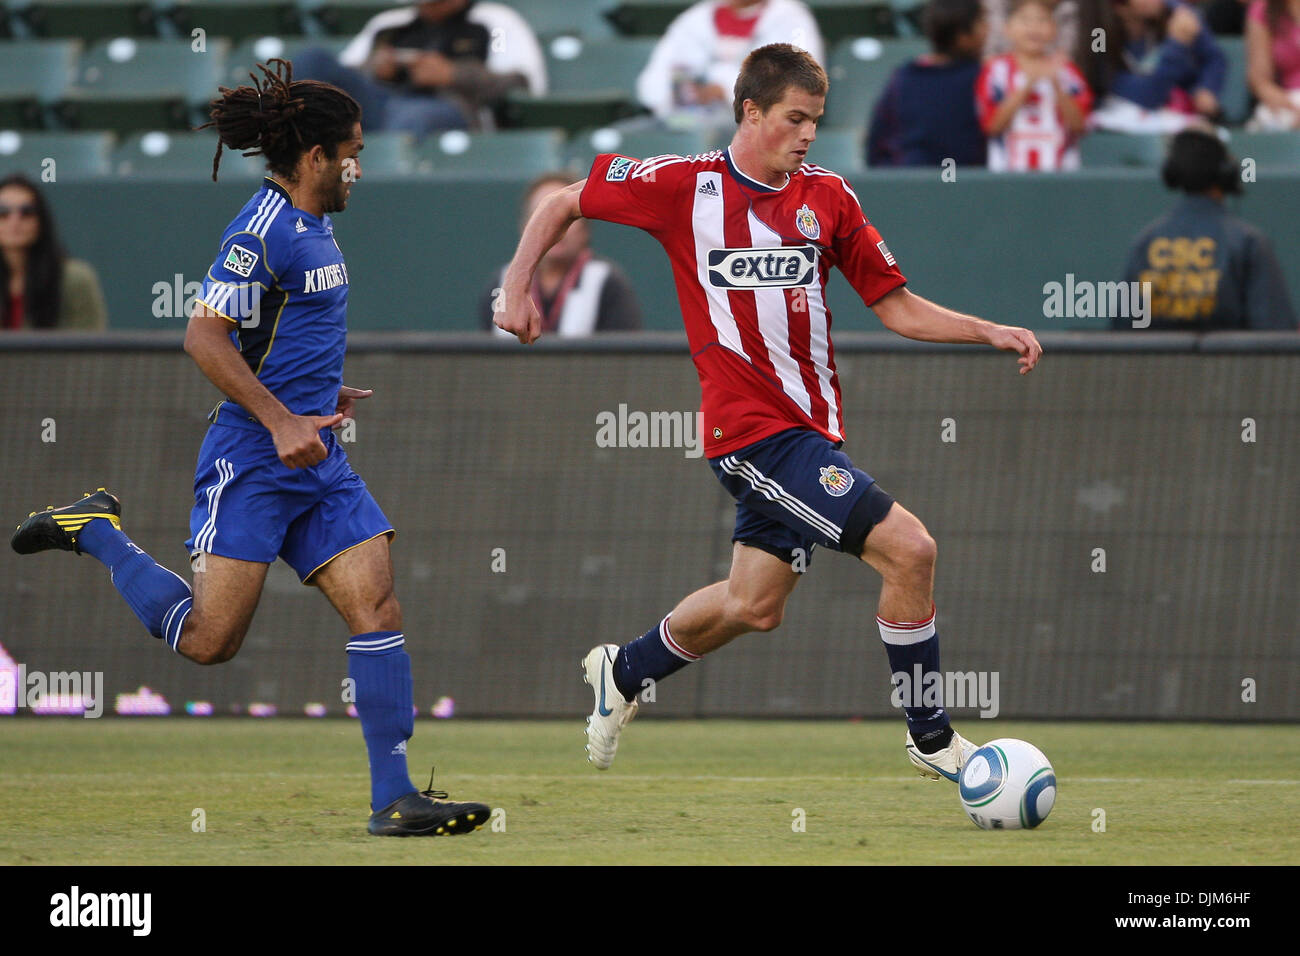 Sept. 19, 2010 - Carson, California, United States of America - Chivas USA forward (#17) Justin Braun (R) tries to pull away from Kansas City Wizards midfielder (#8) Stephane Auvray (L) during the Chivas USA vs Wizards game at the Home Depot Center. The Kansas City Wizards went on to defeat Club Depotivo Chivas USA with a final score of 2-0. (Credit Image: © Brandon Parry/Southcree Stock Photo